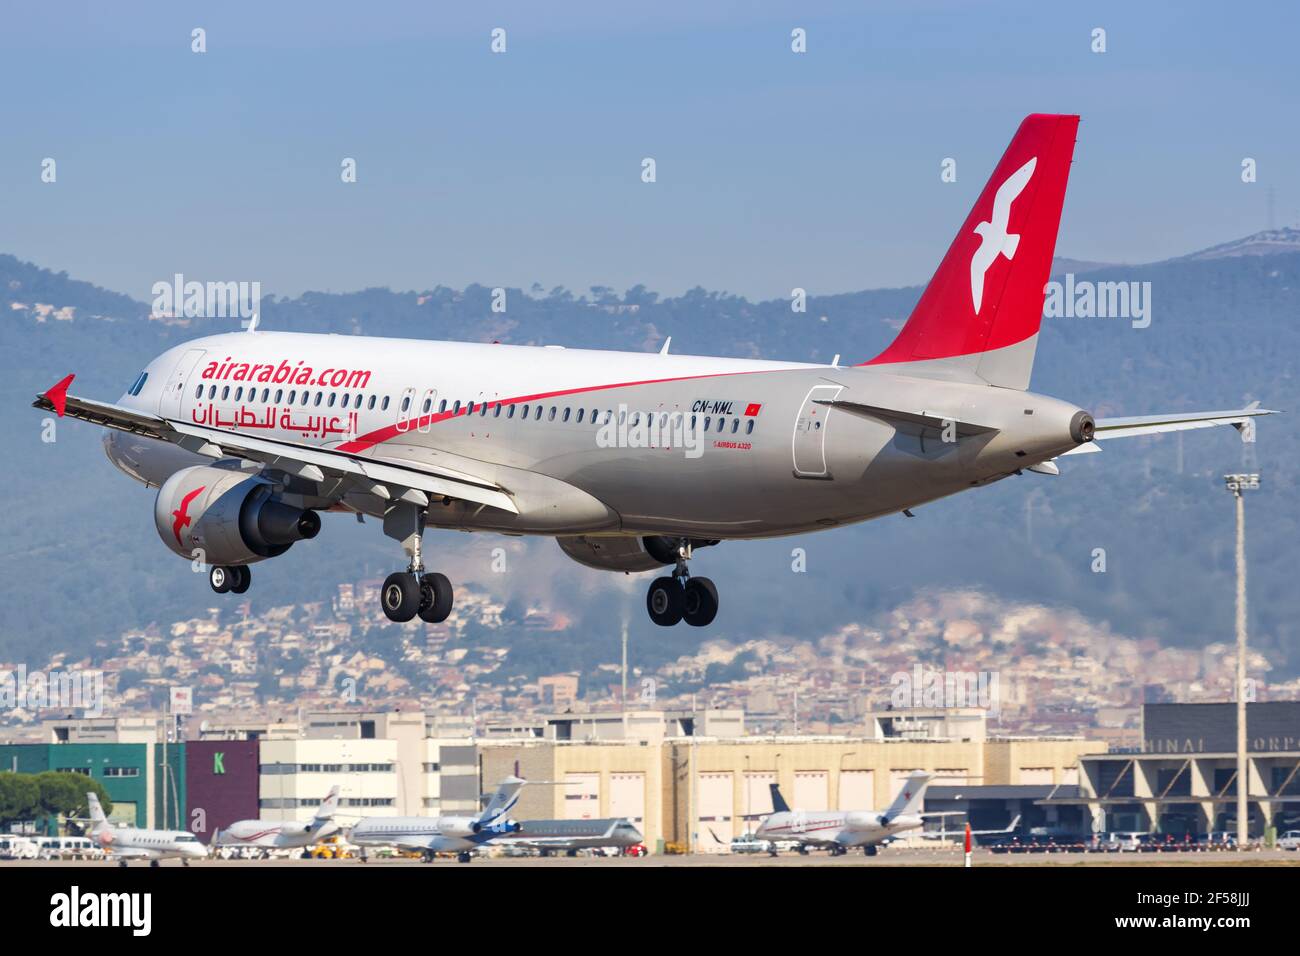 Air Arabia Maroc High Resolution Stock Photography and Images - Alamy